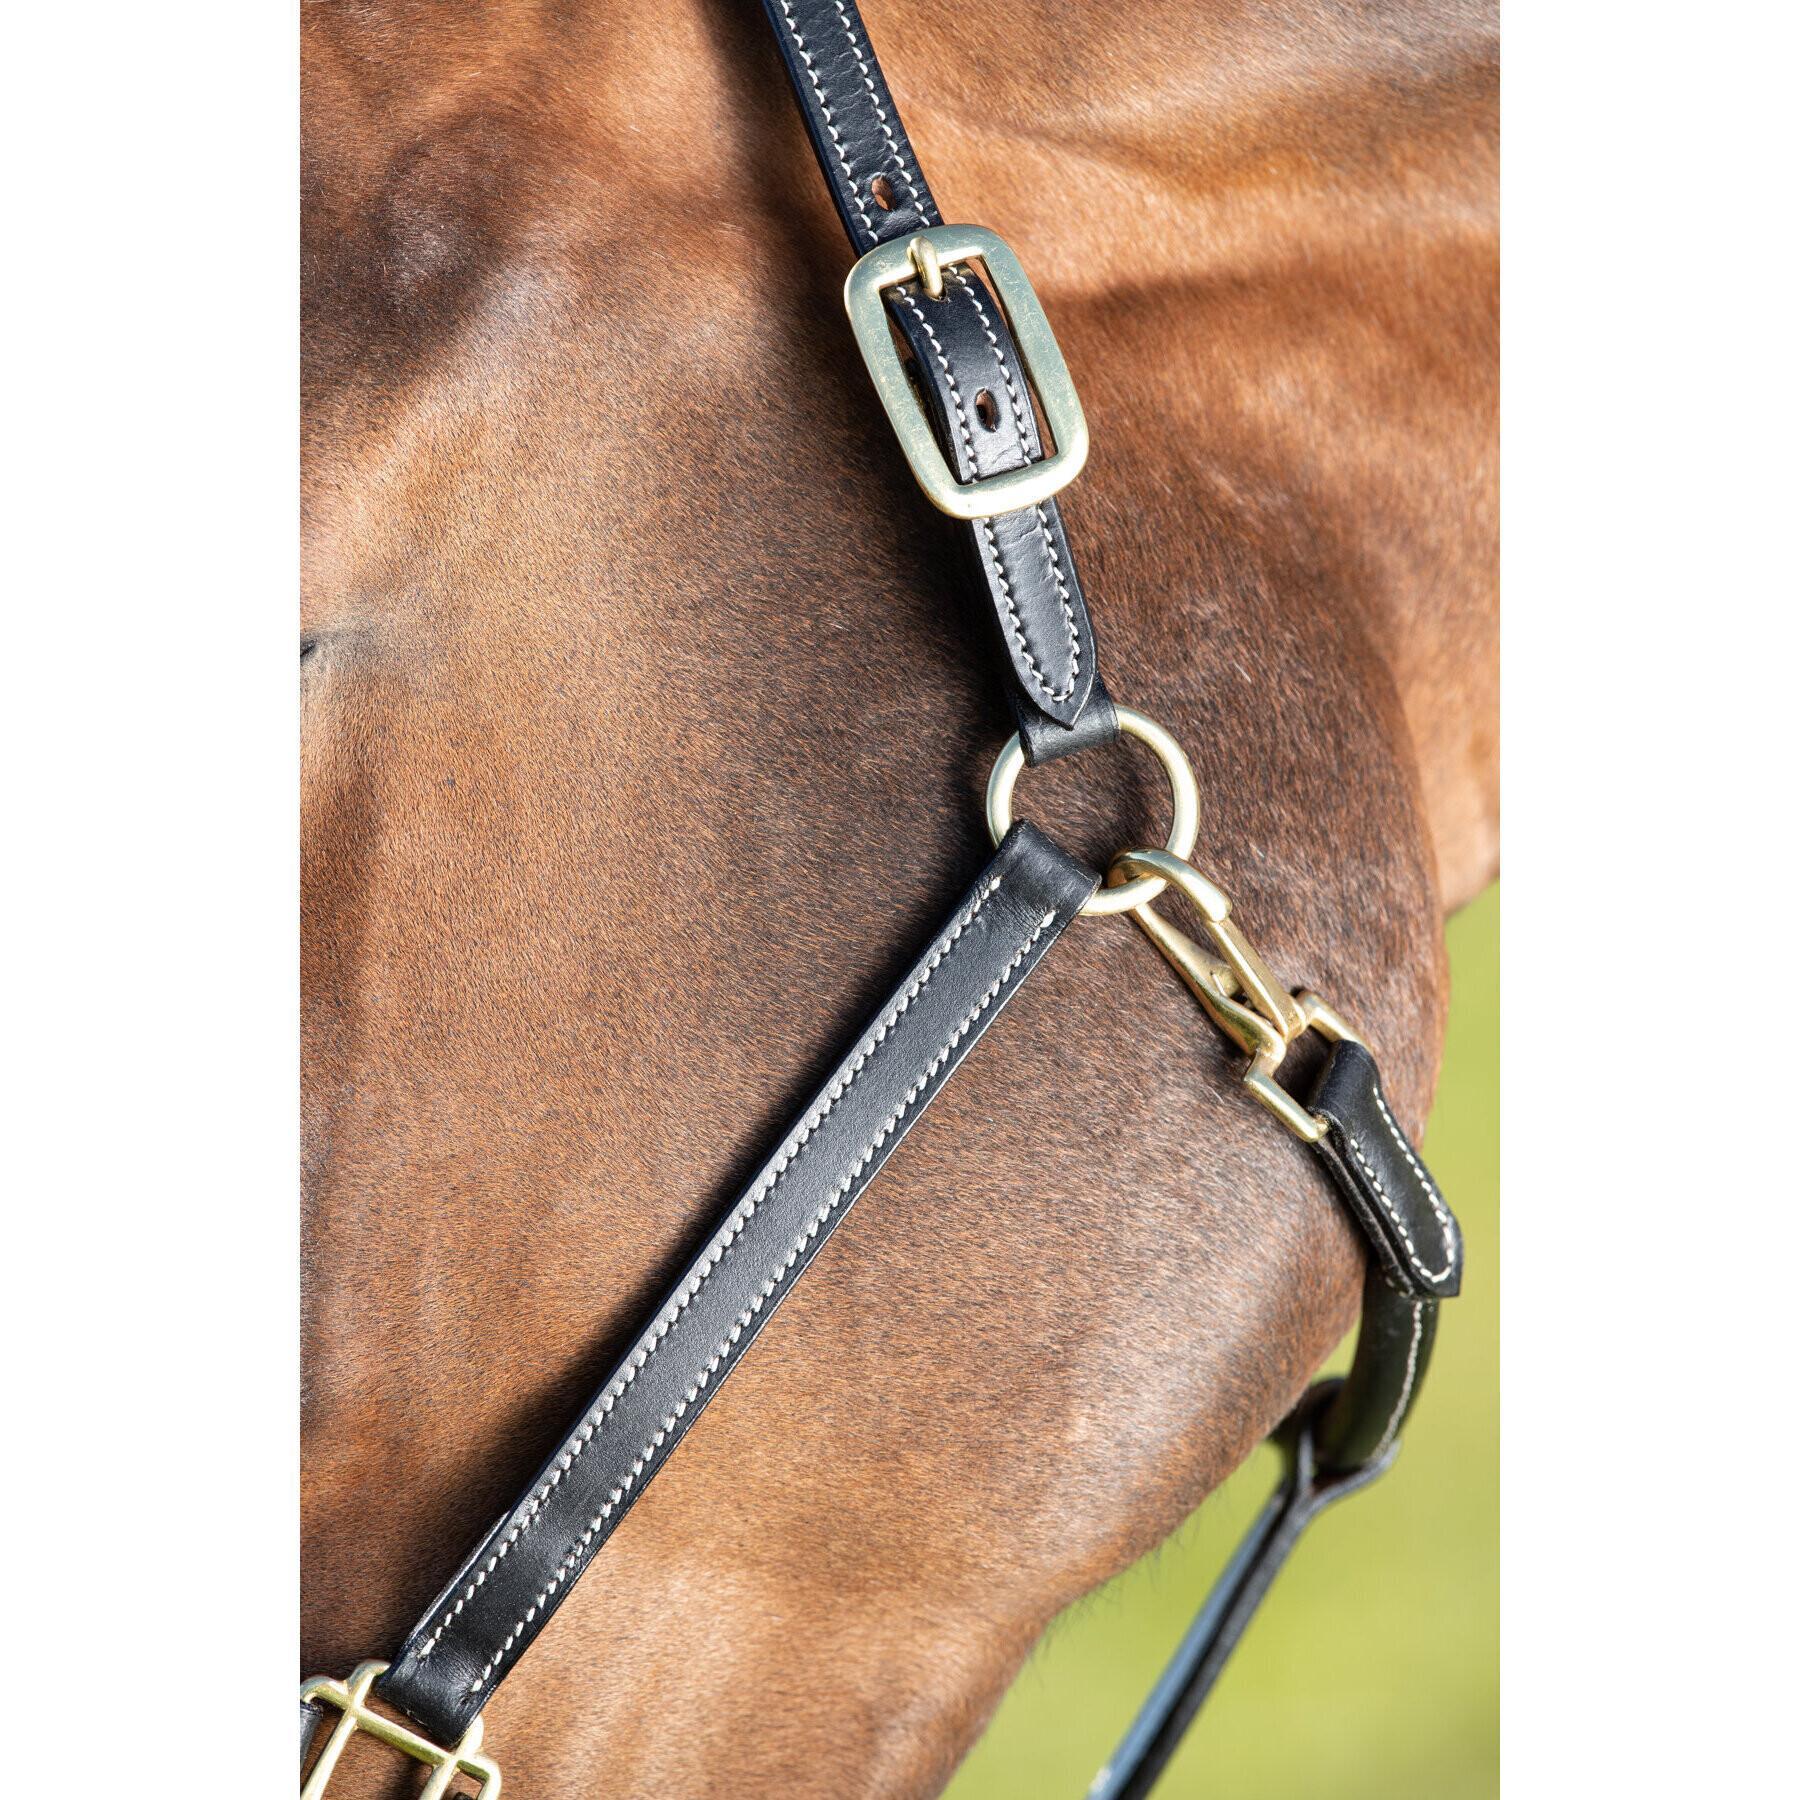 Licol cuir coutures creme pour cheval HFI